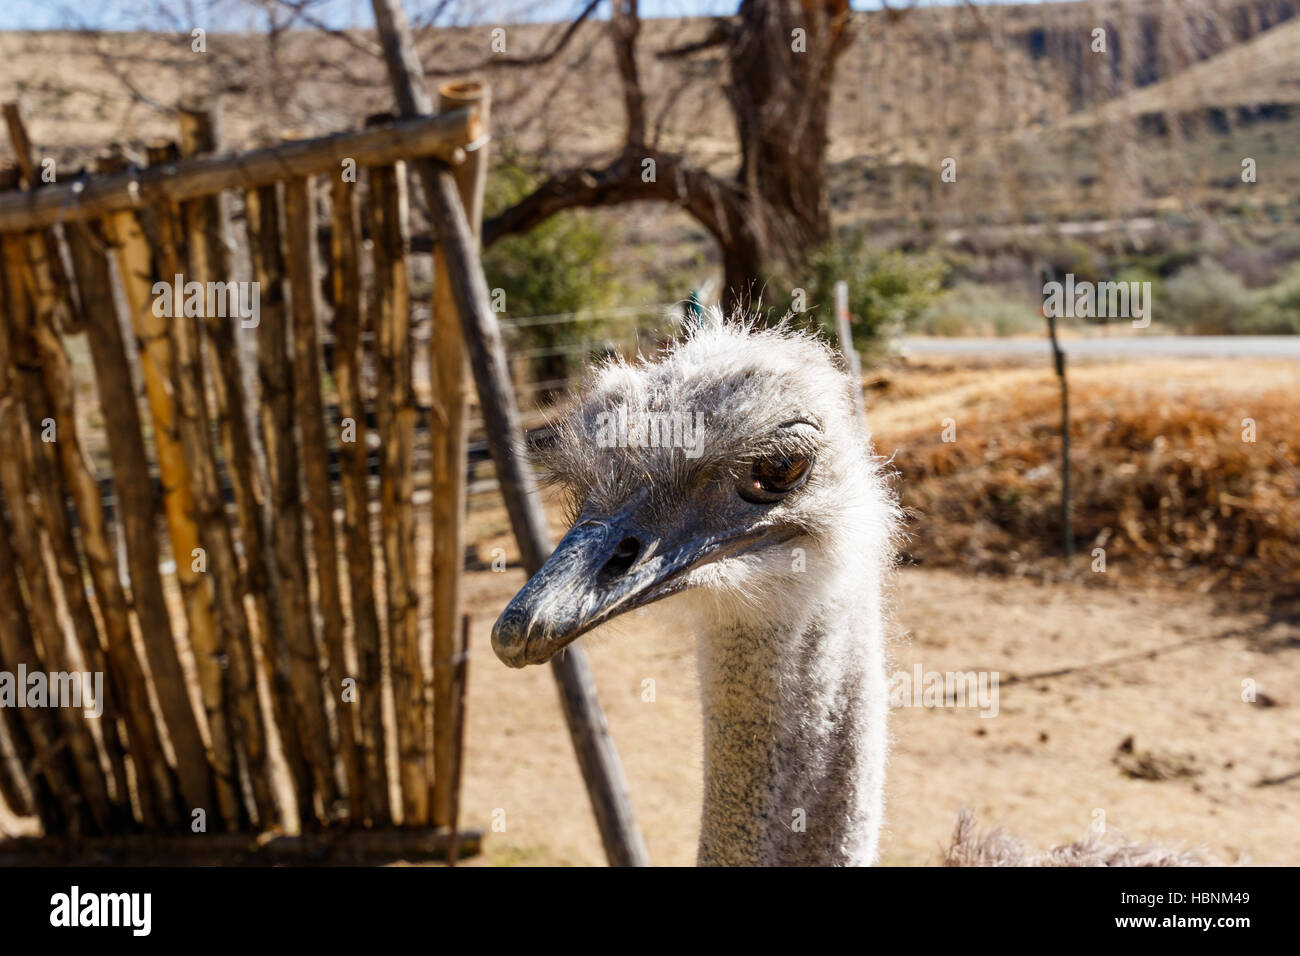 Ostrich Head down and taking a break Stock Photo